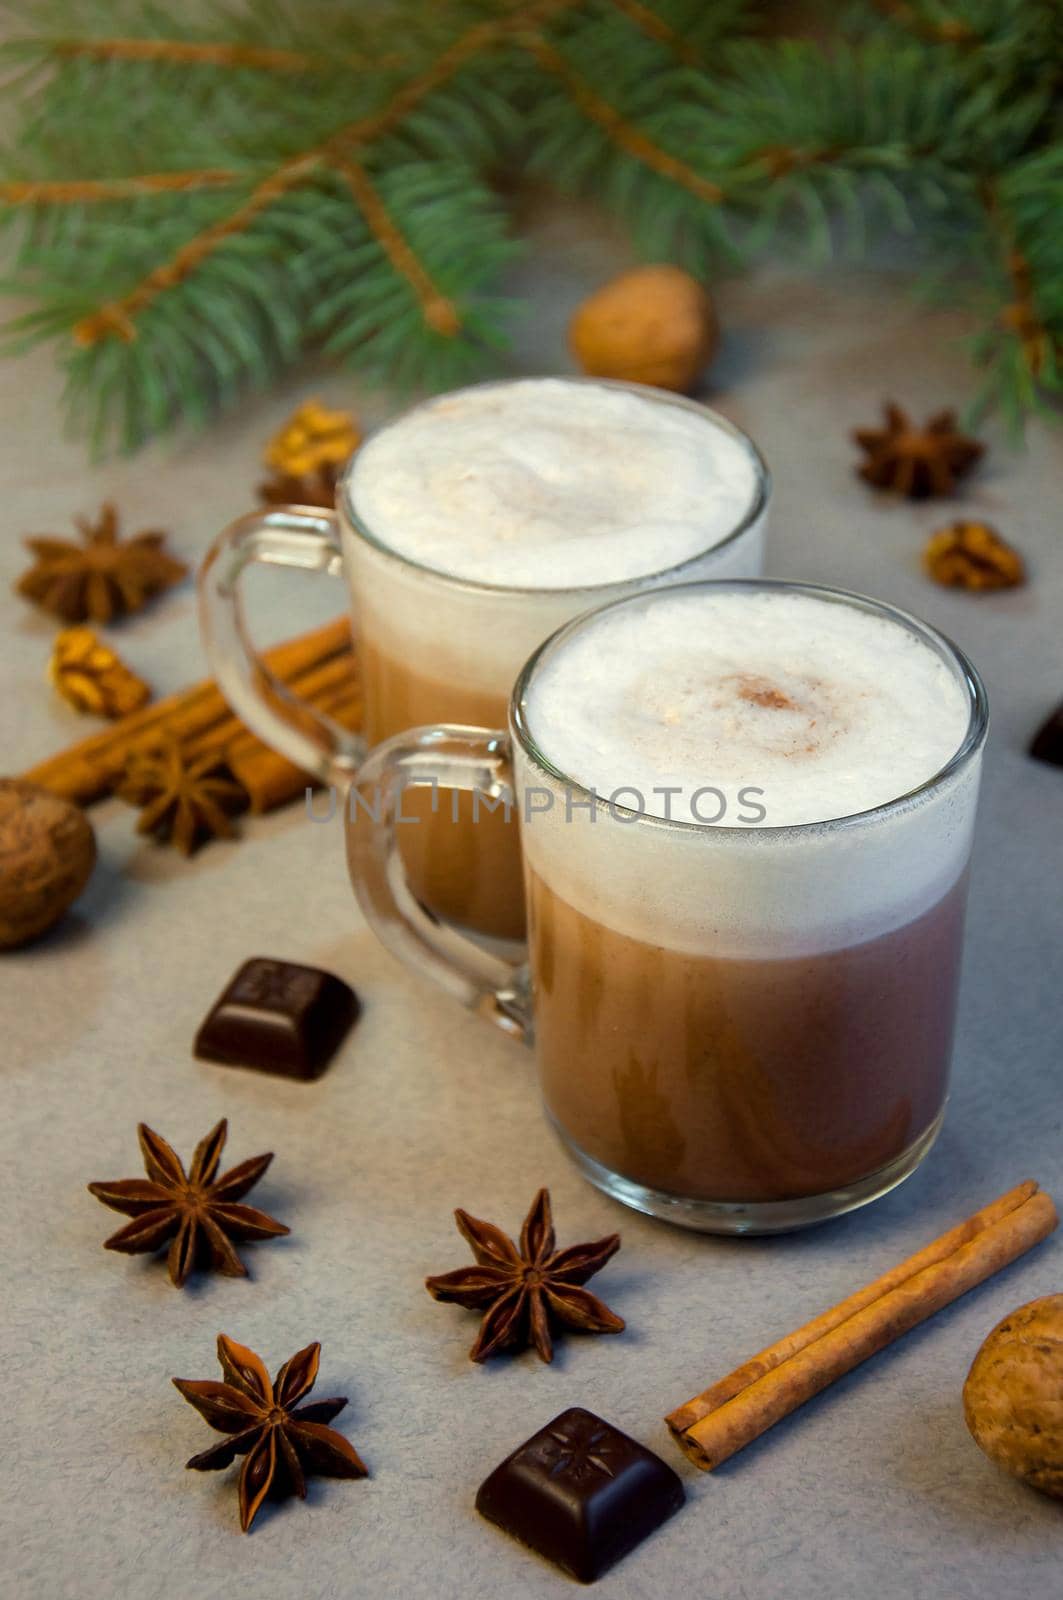 Hot Christmas Drink Cocoa Coffee or Chocolate with Milk Cream in a Small Transparent Cup. Fir Tree Branch, Nuts, Cinnamon Sticks Star Anise on a Grey Background. Winter time. New Year